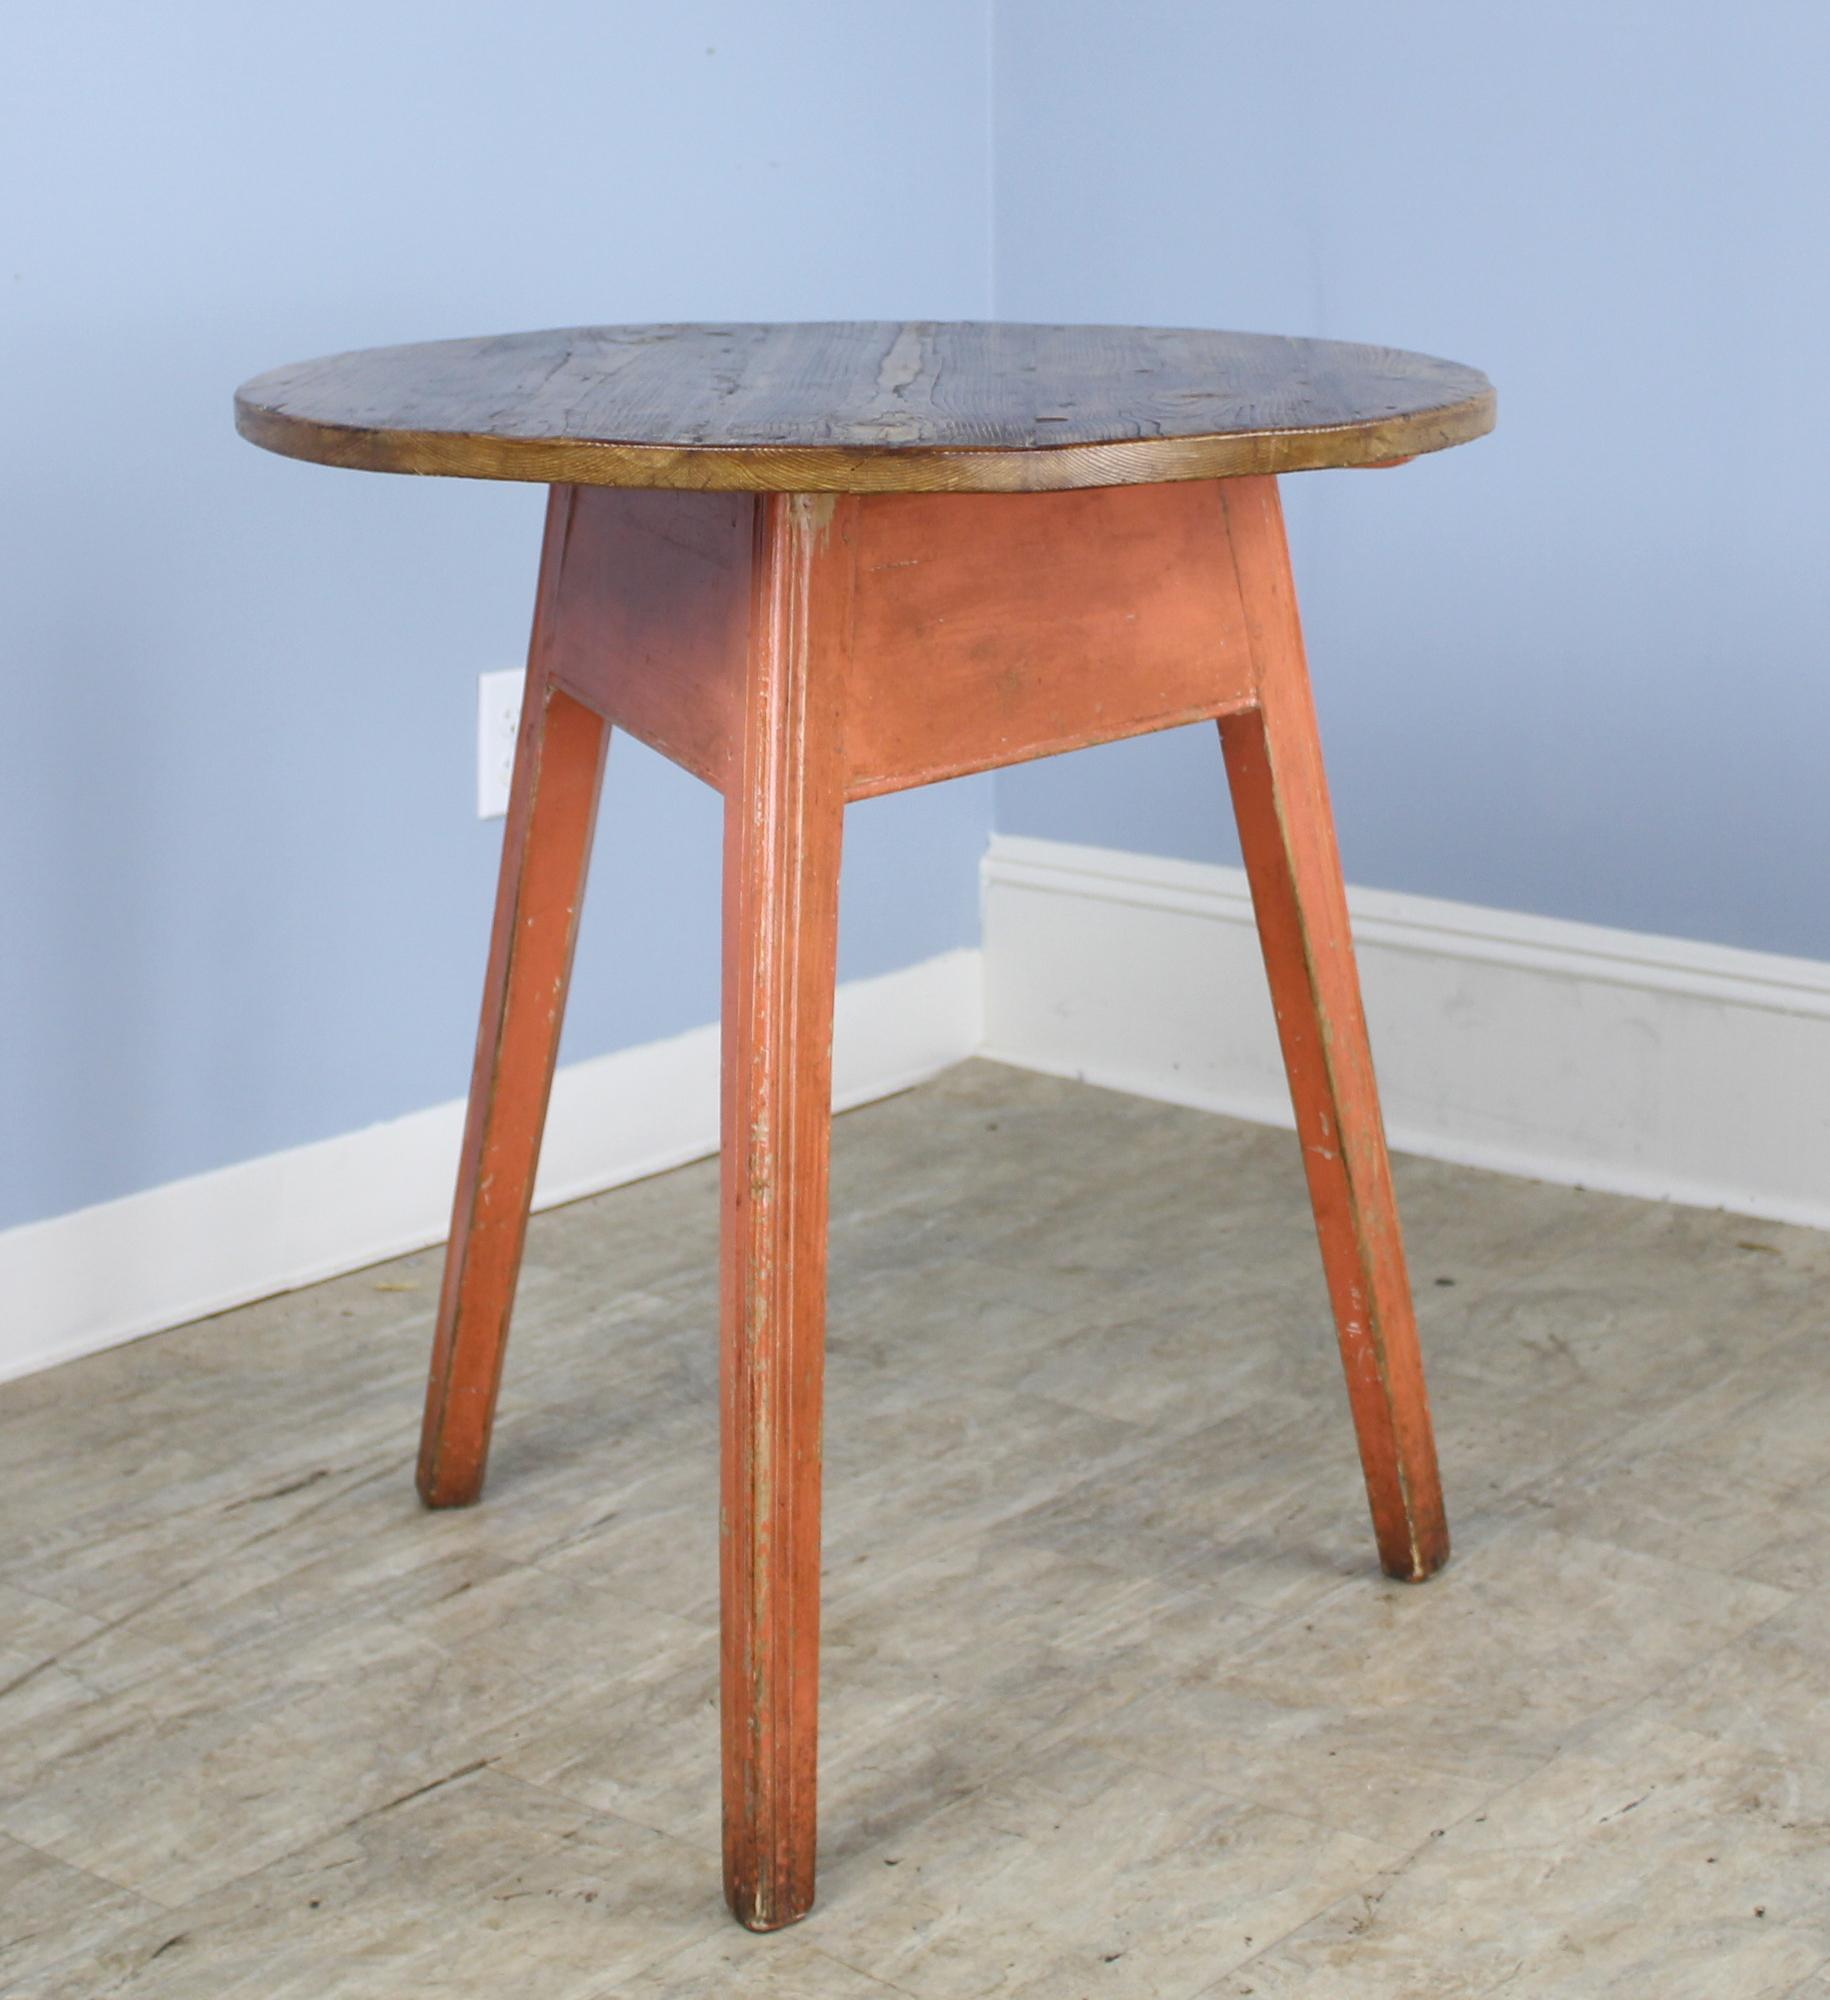 An antique Welsh cricket table. The base has the old light red paint, and the top is a honey pine, both rich in wear and patina. Makes a terrific lamp table. Note that the top is not a perfect circle.